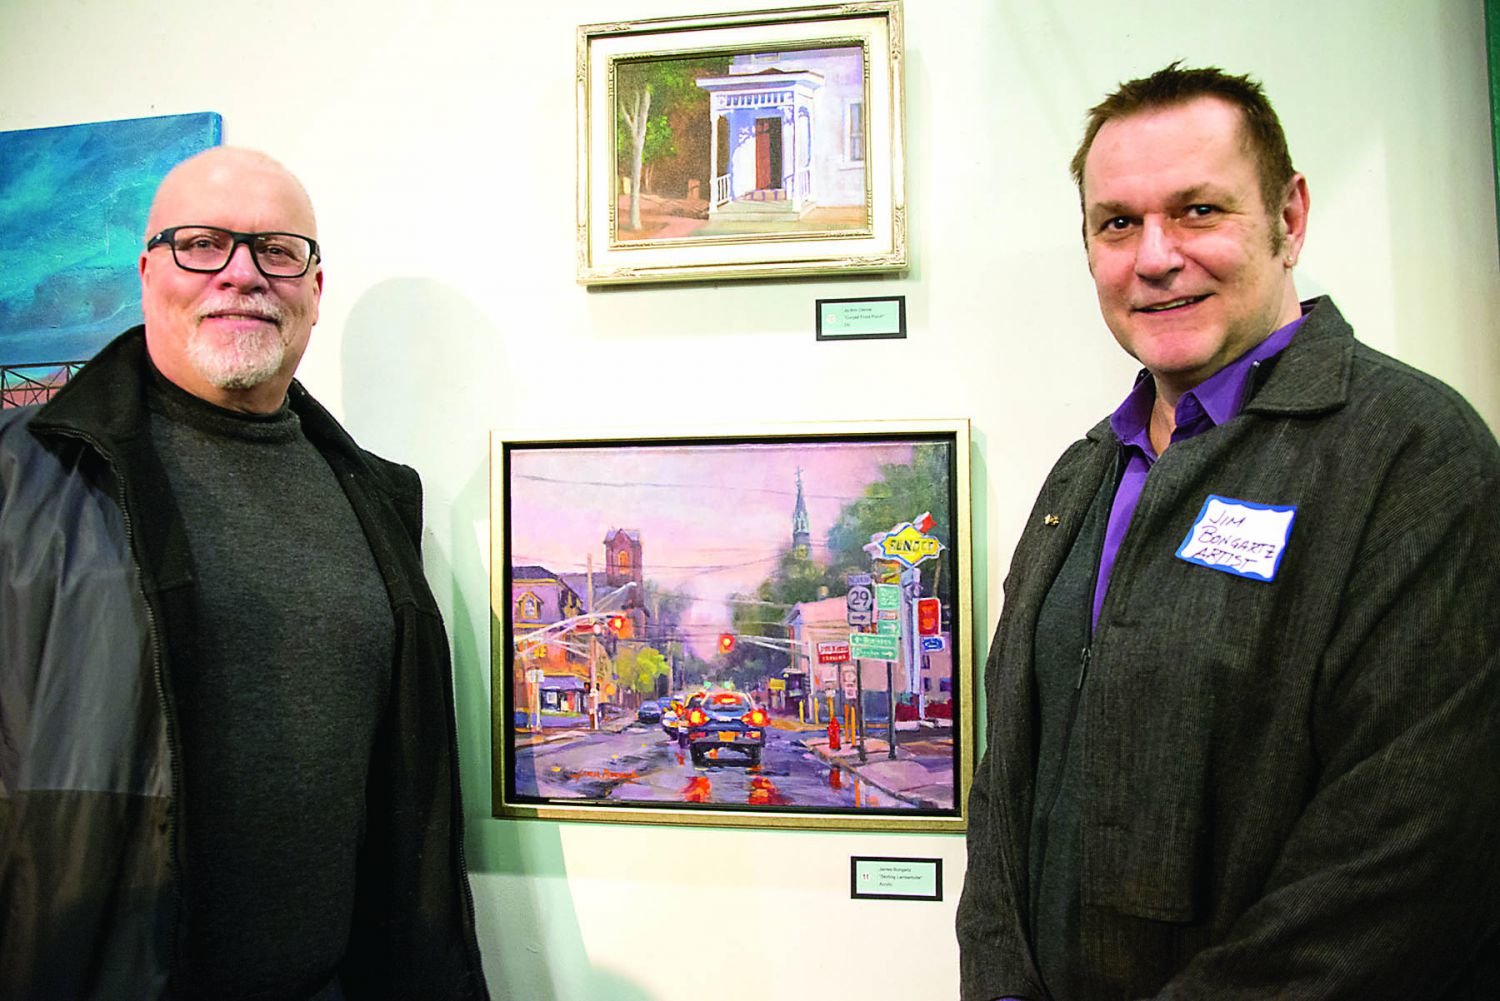 Artist Jim Bongartz, with his painting at the bottom, “Skirting Lambertville,” and his partner, Kevin Mensch, both of Morrisville. Photograph by Chiara Chandoha.